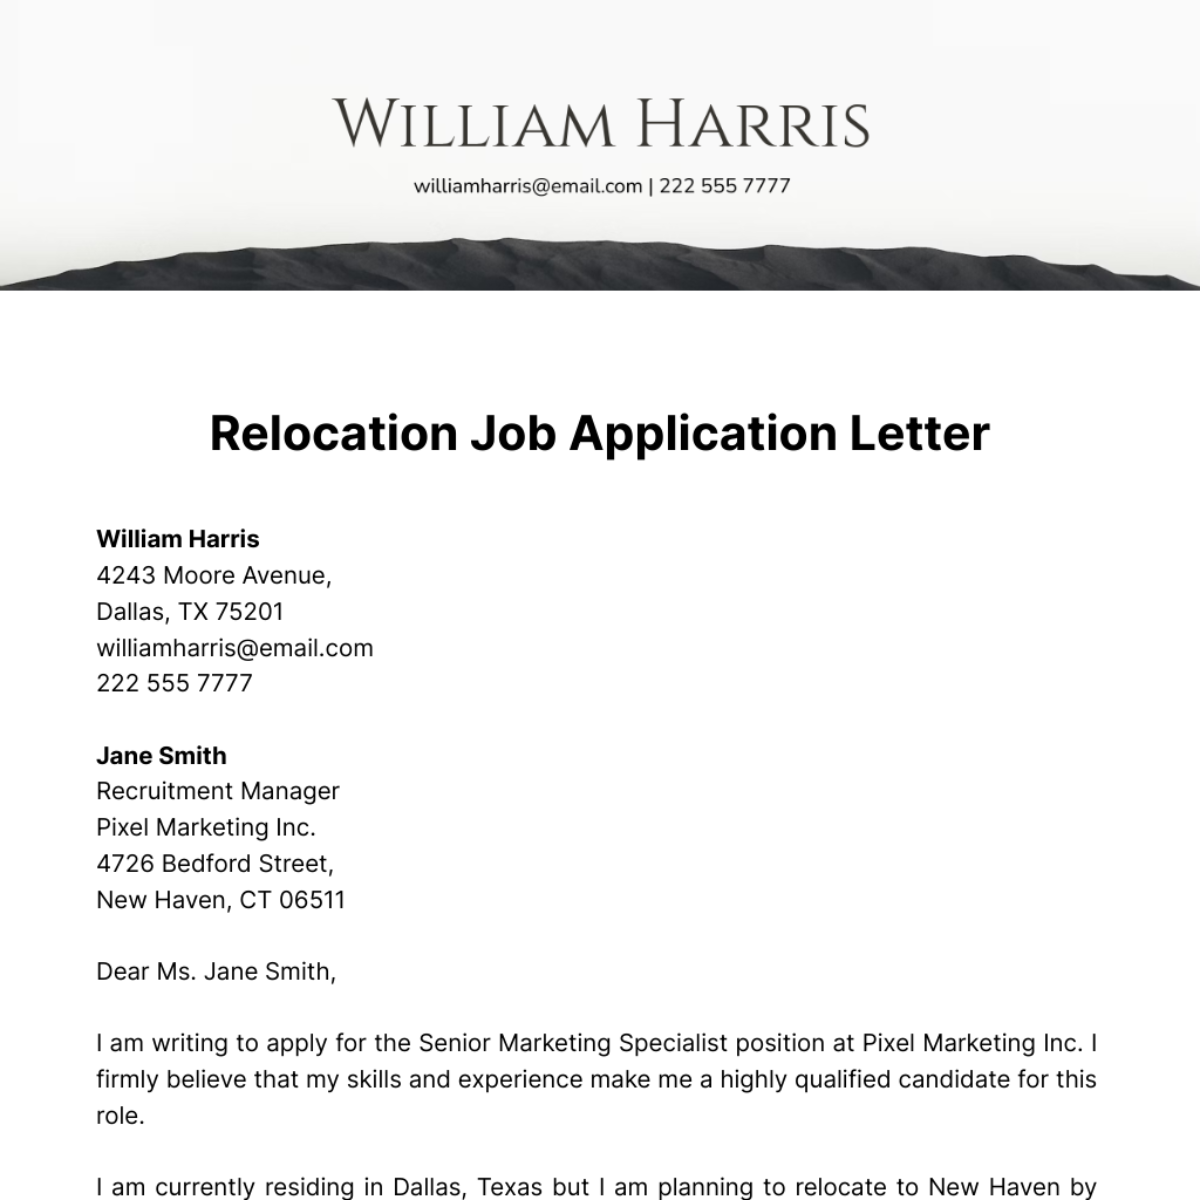 Relocation Job Application Letter  Template